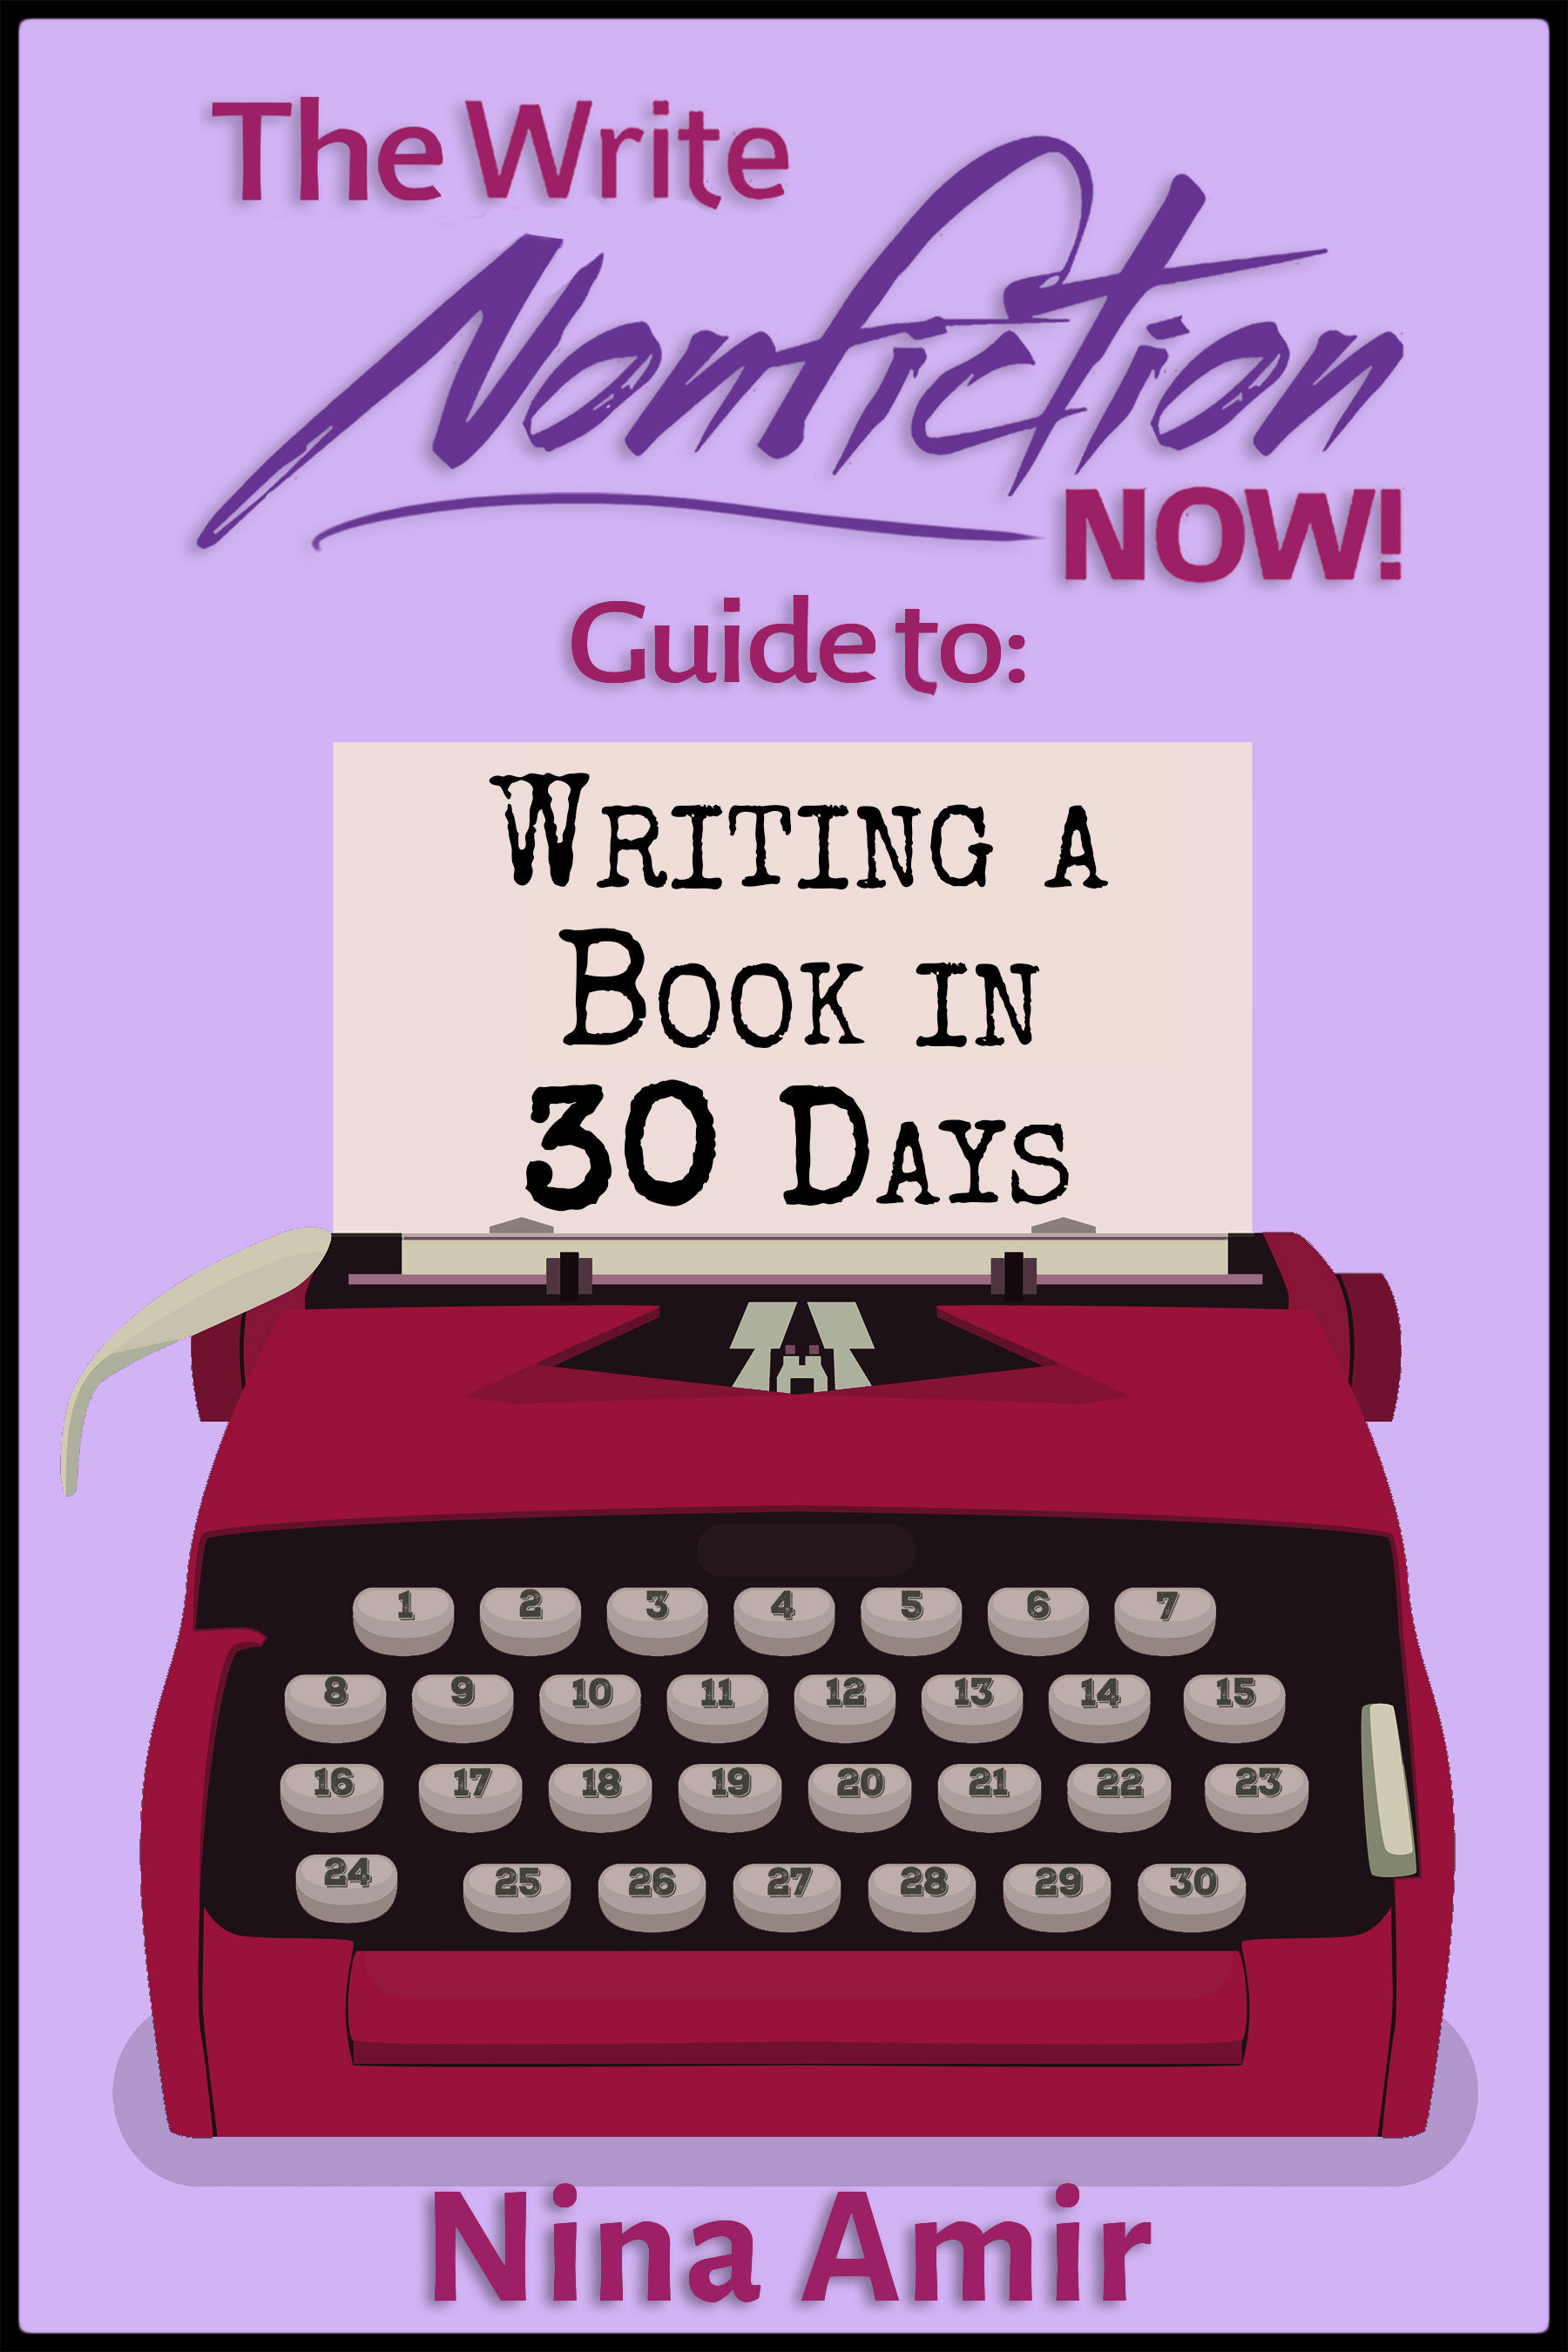 write a book in 30 days challenge